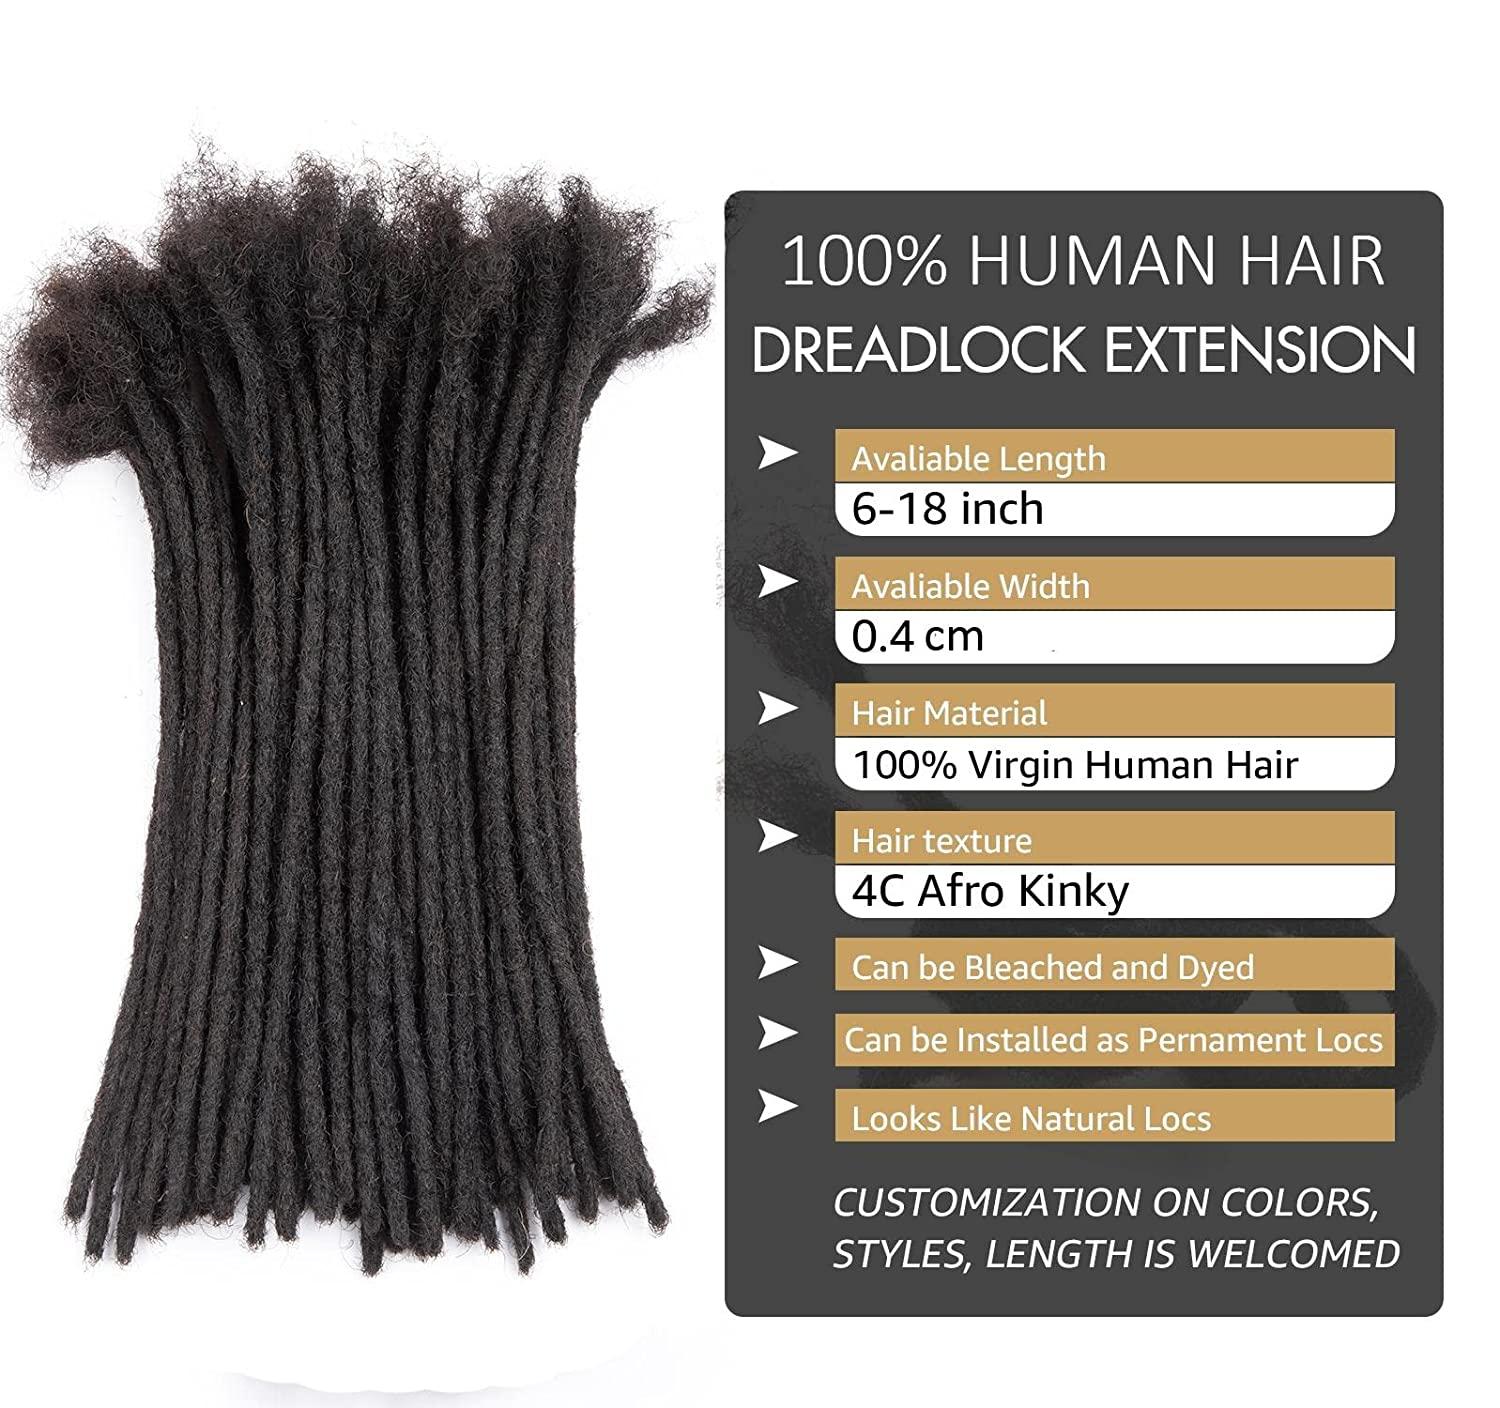 LOC Extensions Human Hair 8 inch 0.4cm Width Handmade Dreadlock Extensions for Women Men Dreads Extensions Human Hair Can Be Dyed Bleached Curled